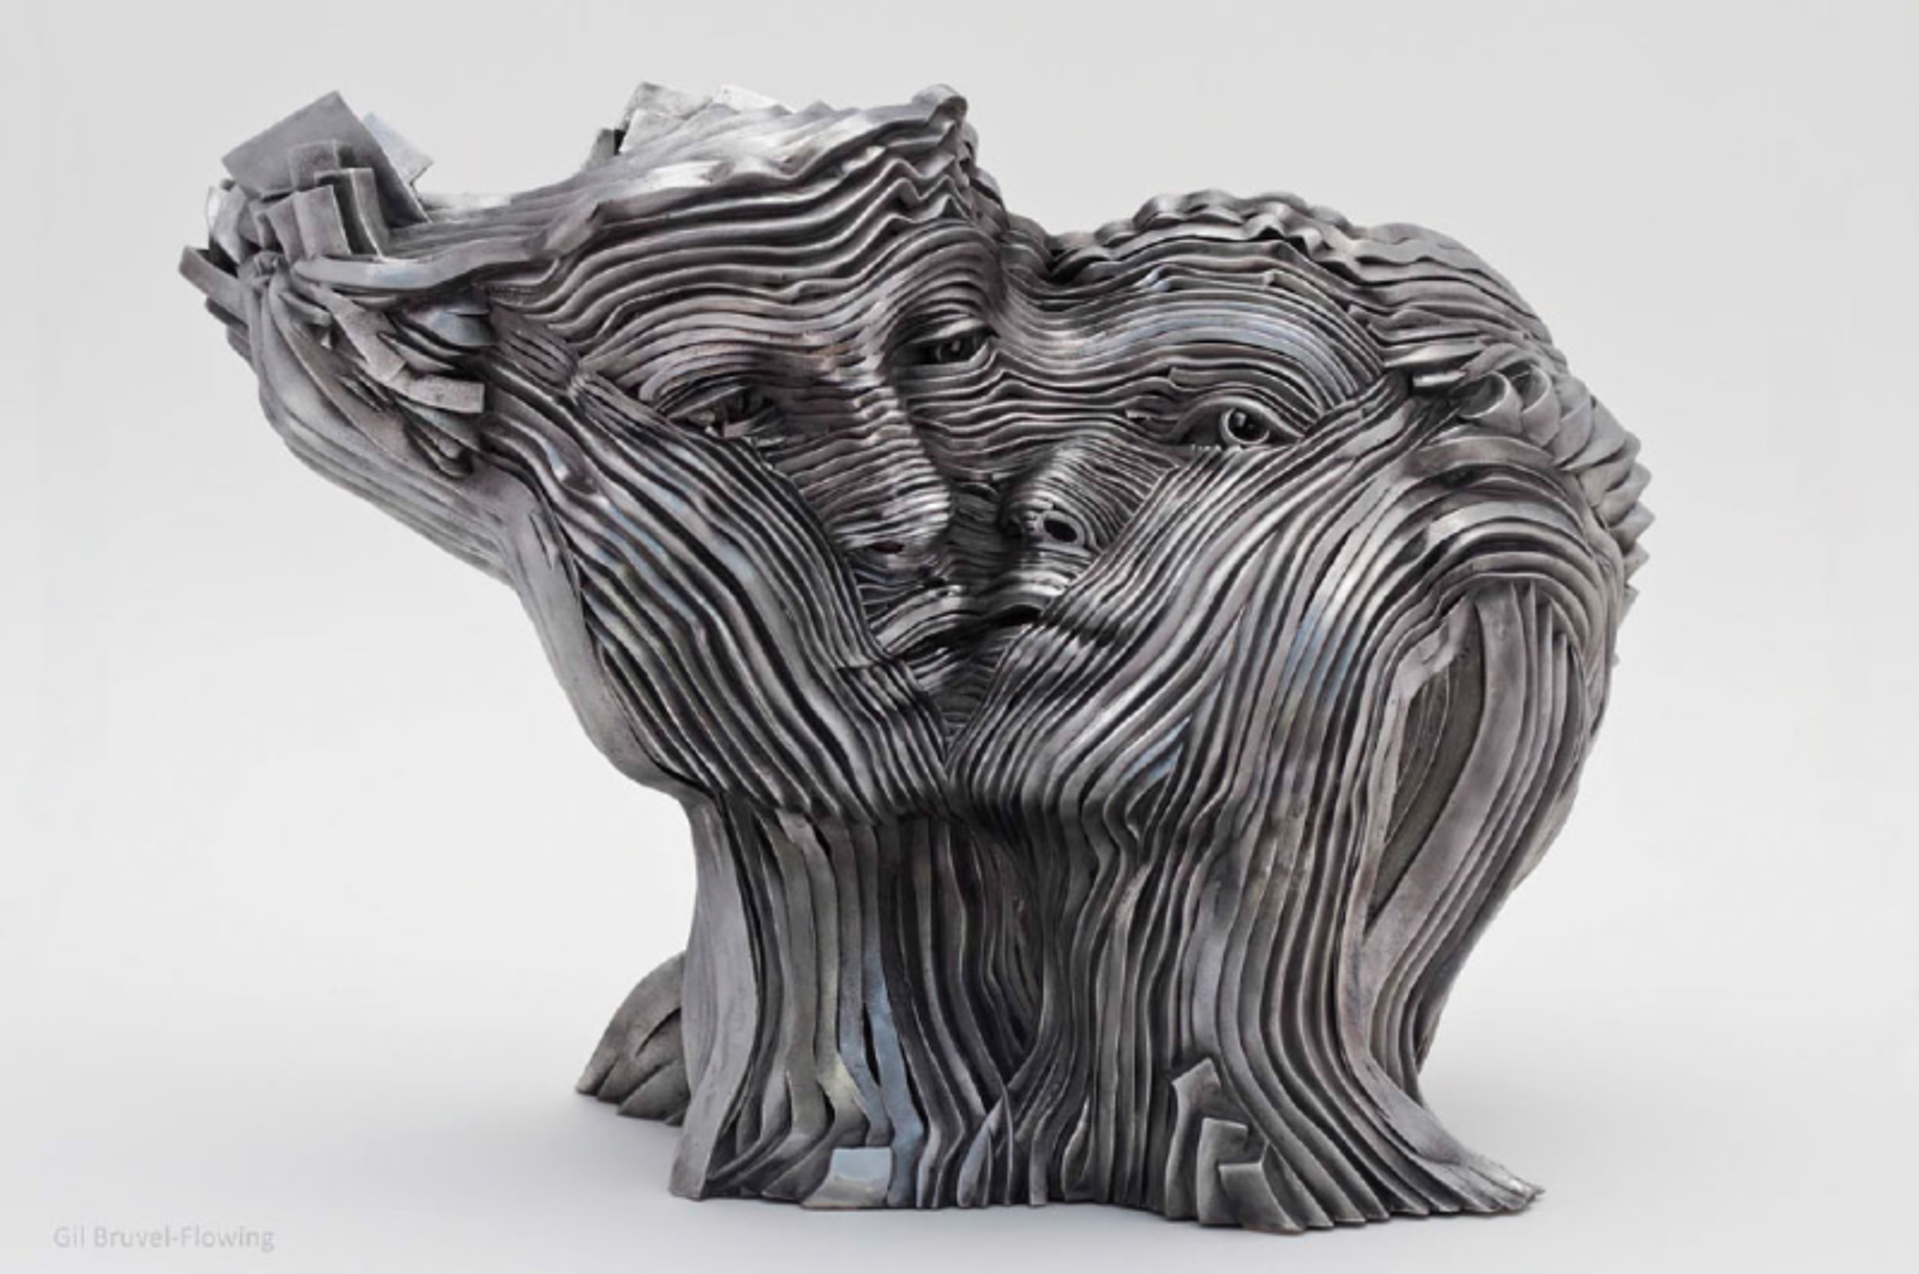 Flowing by Gil Bruvel